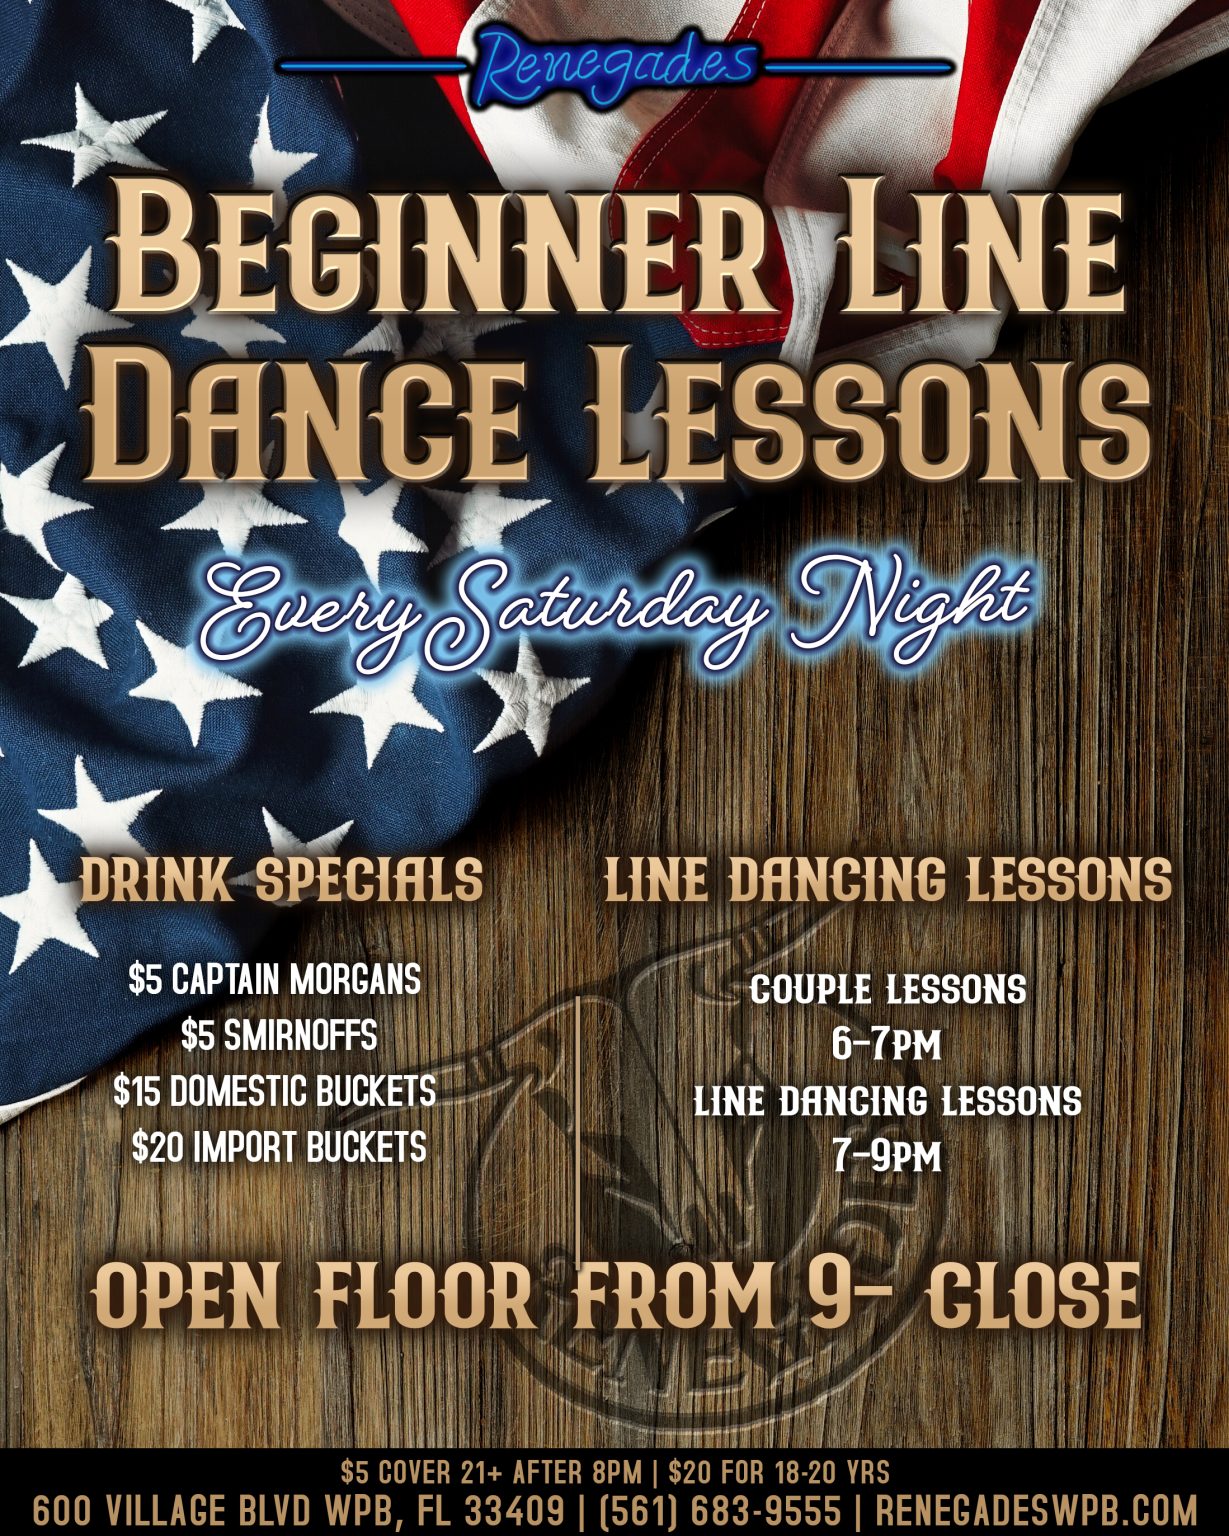 Beginner Line Dance Lessons at Renegades - West Palm Beach